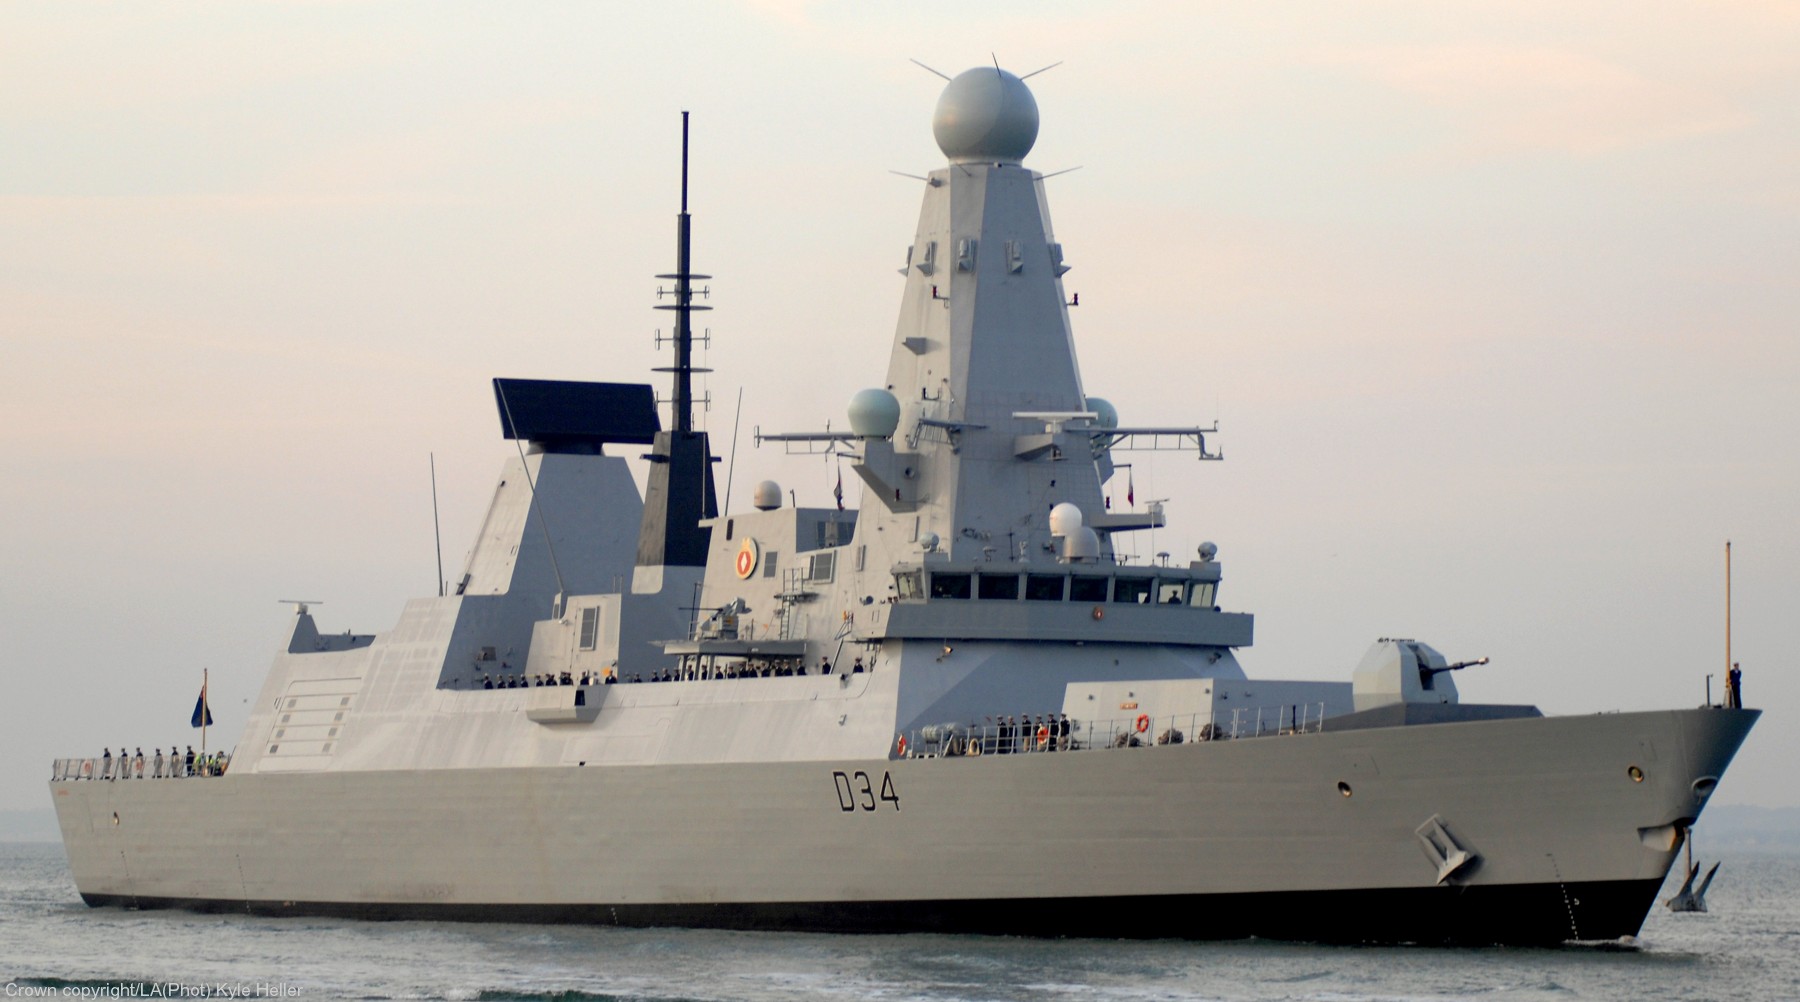 hms diamond d-34 type 45 daring class guided missile destroyer ddg royal navy sea viper paams 22